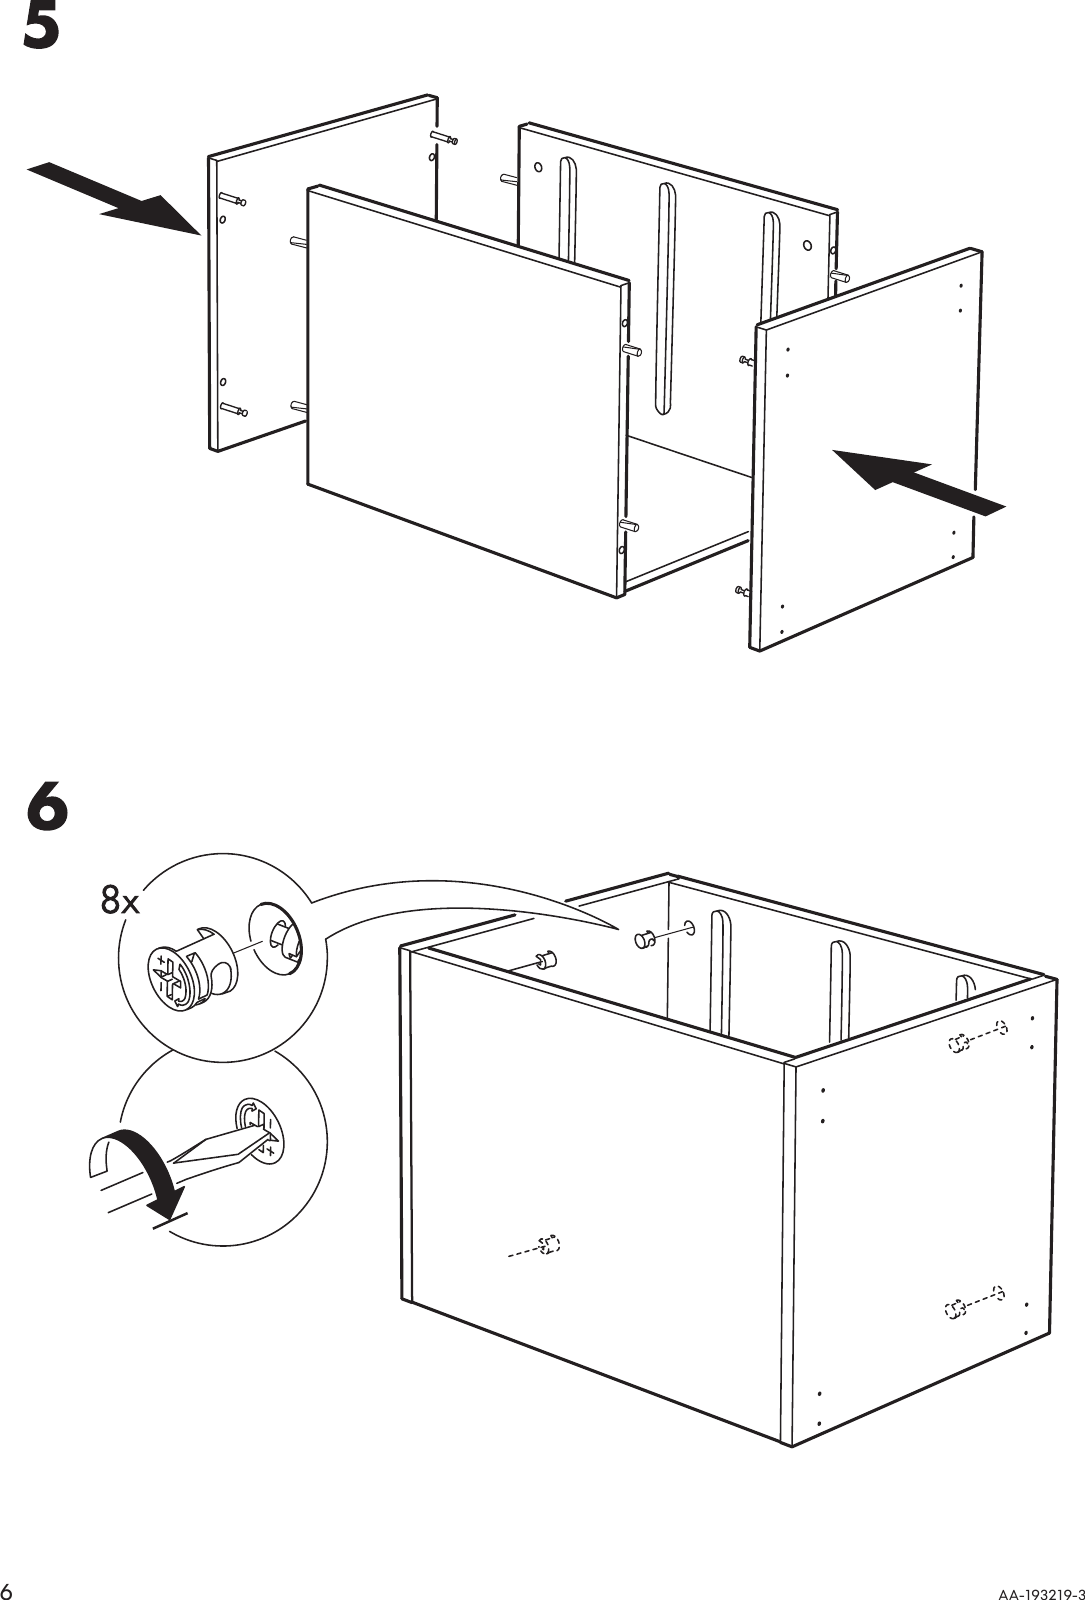 Page 6 of 12 - Ikea Ikea-Goliat-Drawer-Unit-Casters-Assembly-Instruction